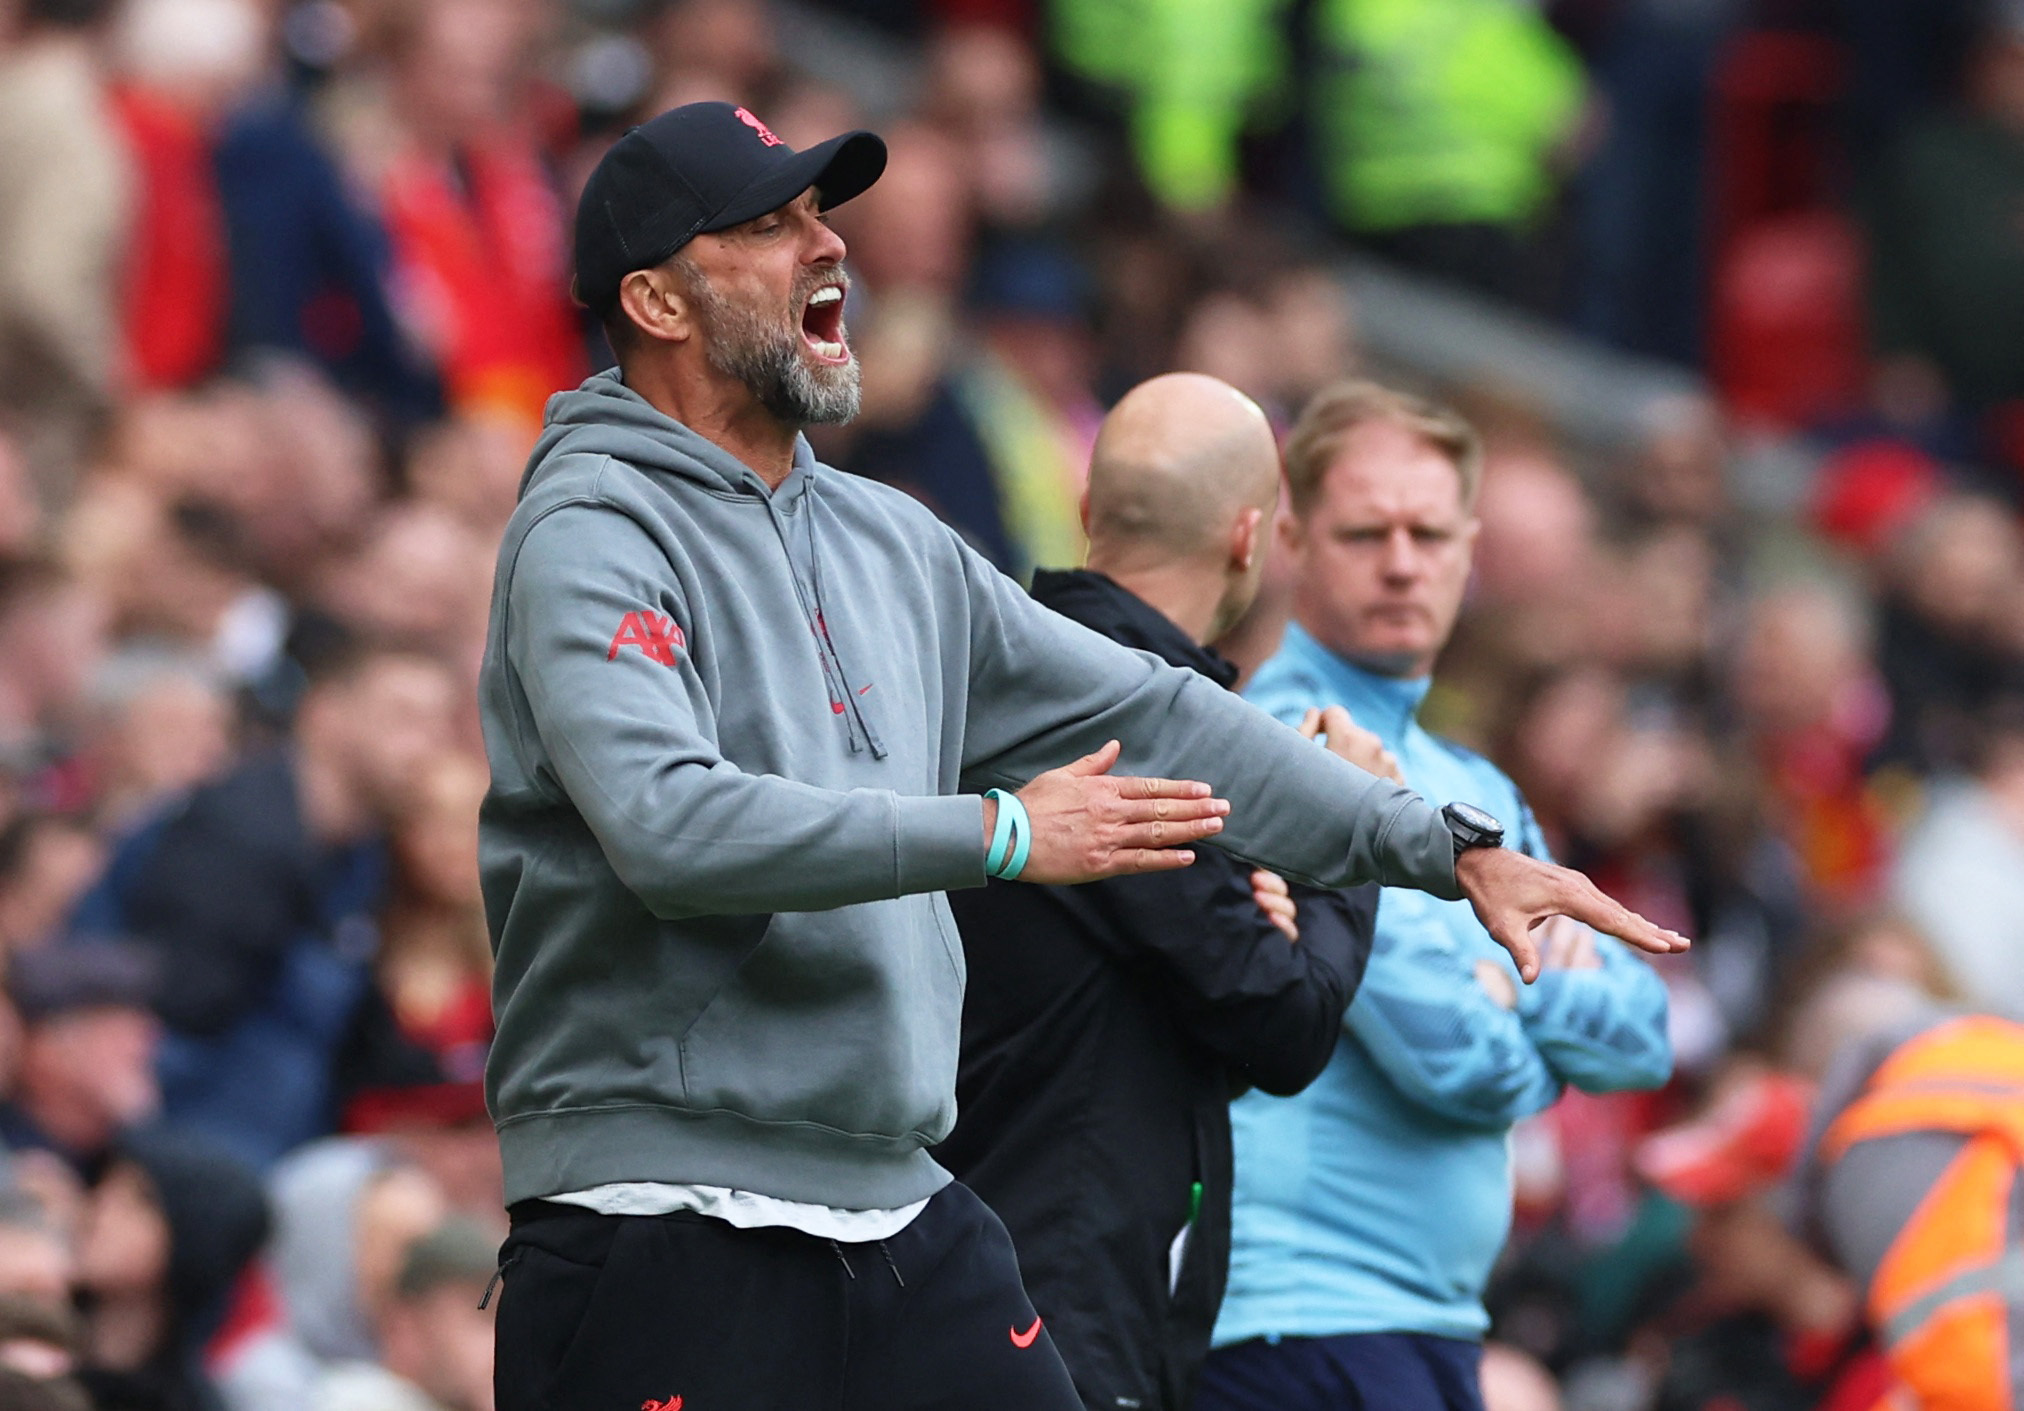 Concrete' Liverpool move due in 'next few days' as journalist reveals Klopp  determination to seal €75m deal for world-class star